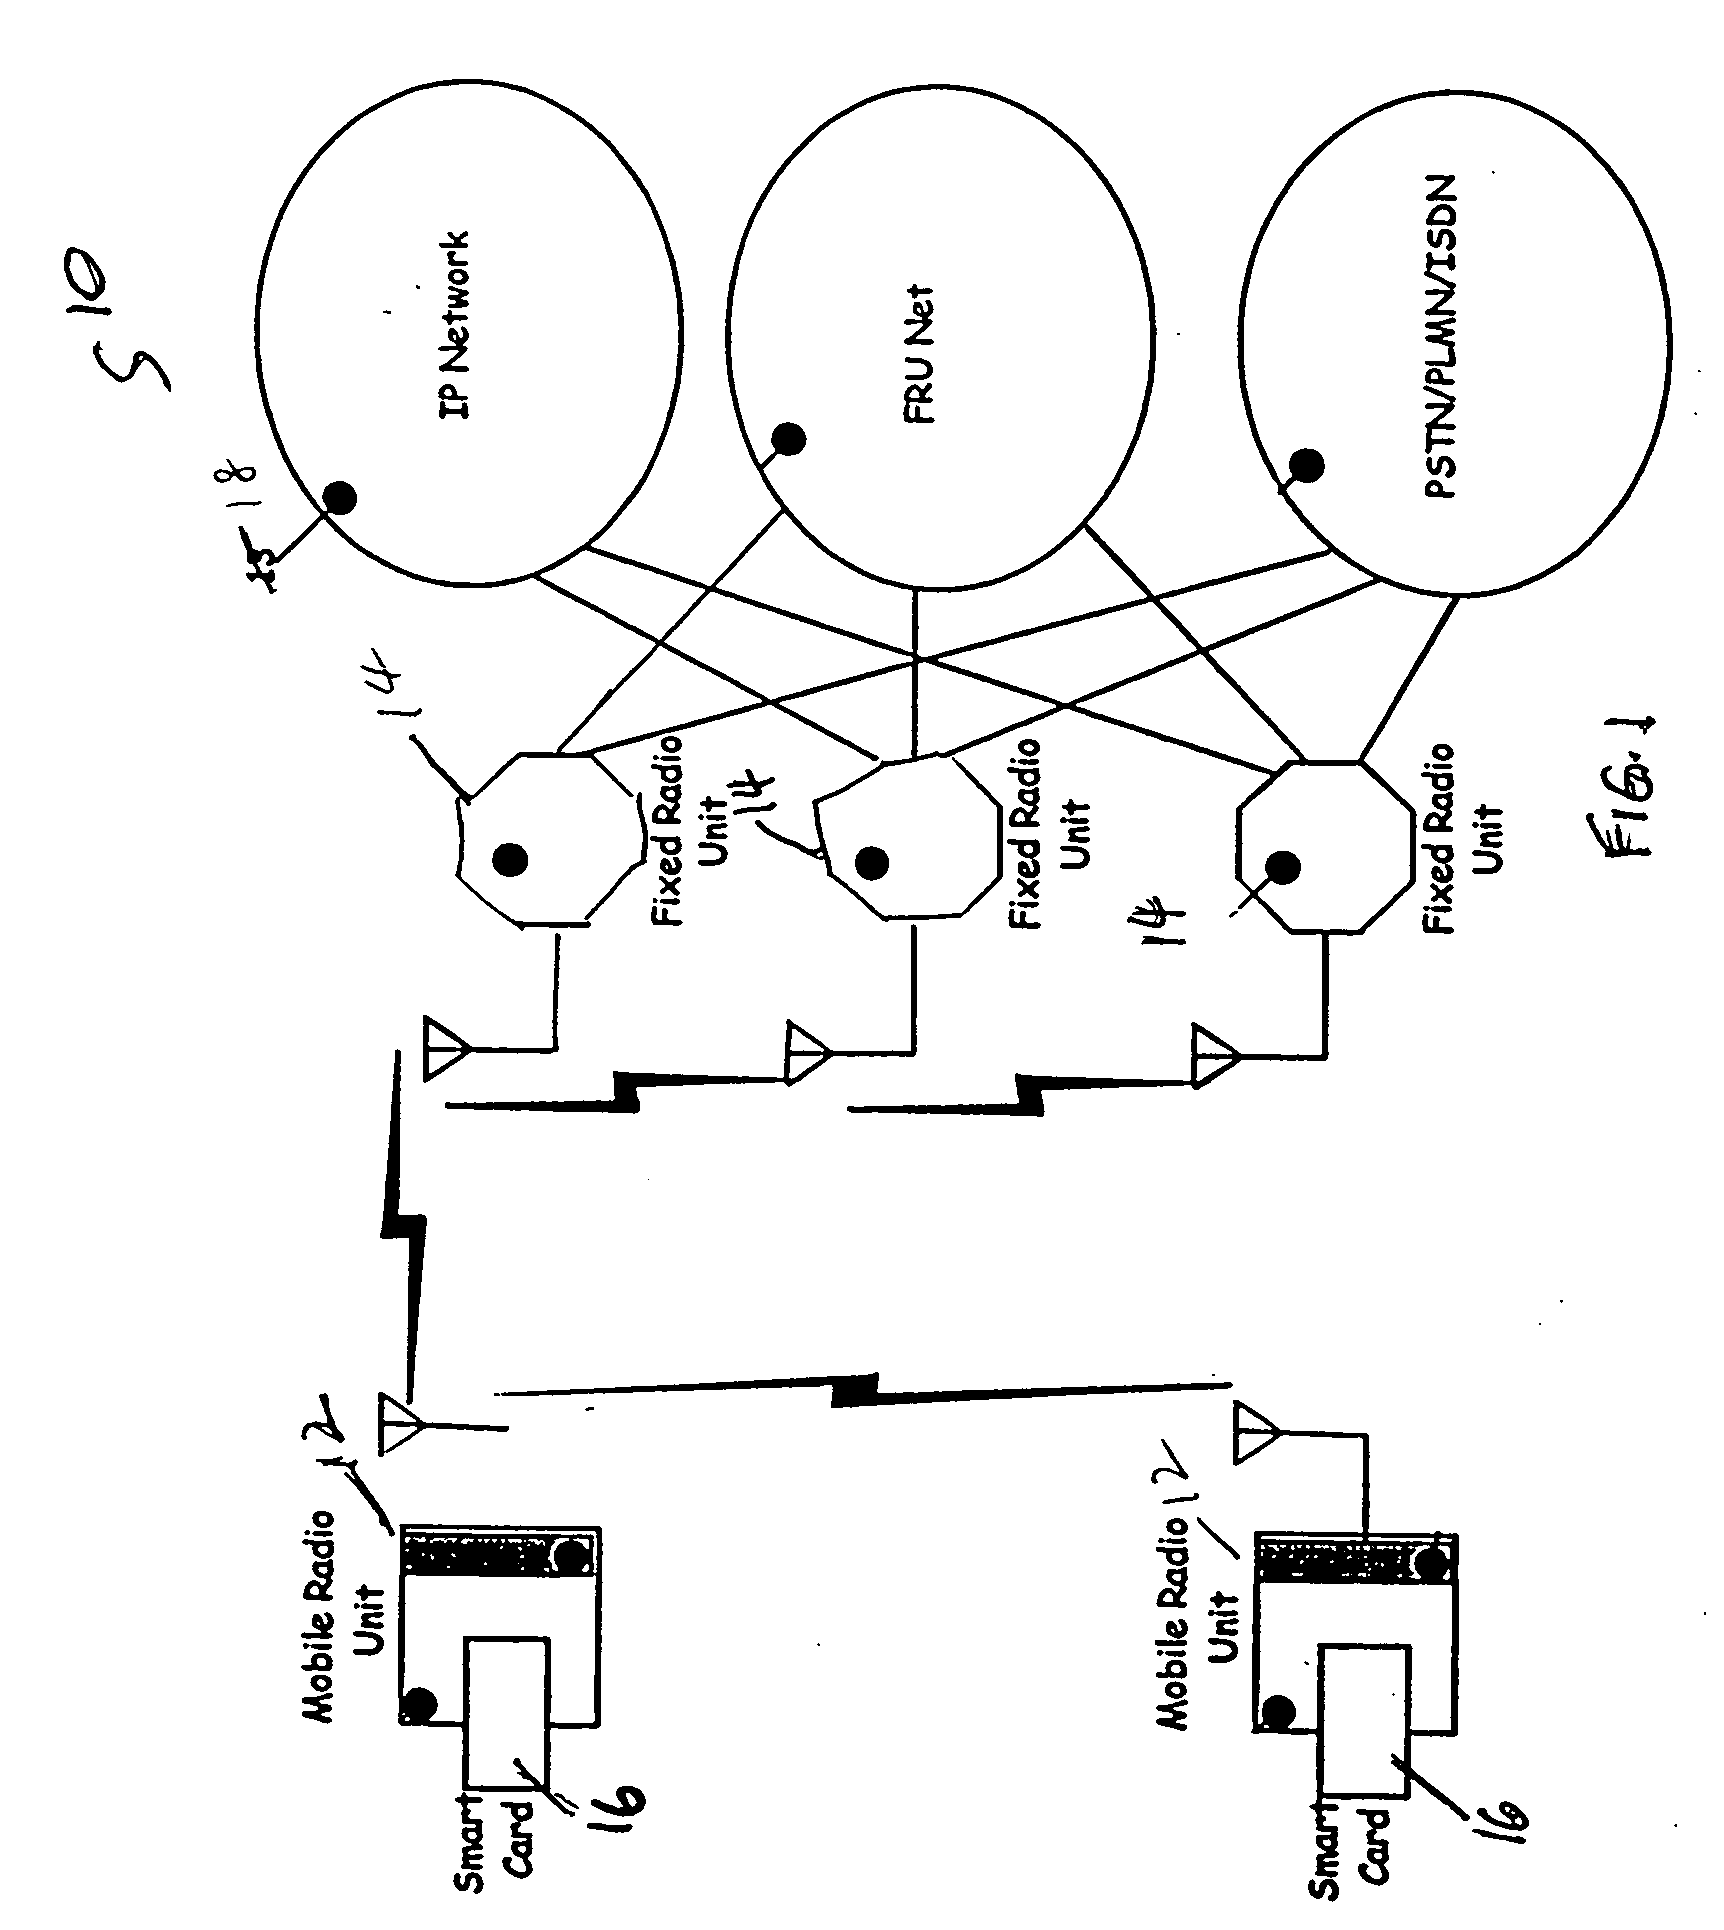 System for mobile broadband networking using dynamic quality of service provisioning